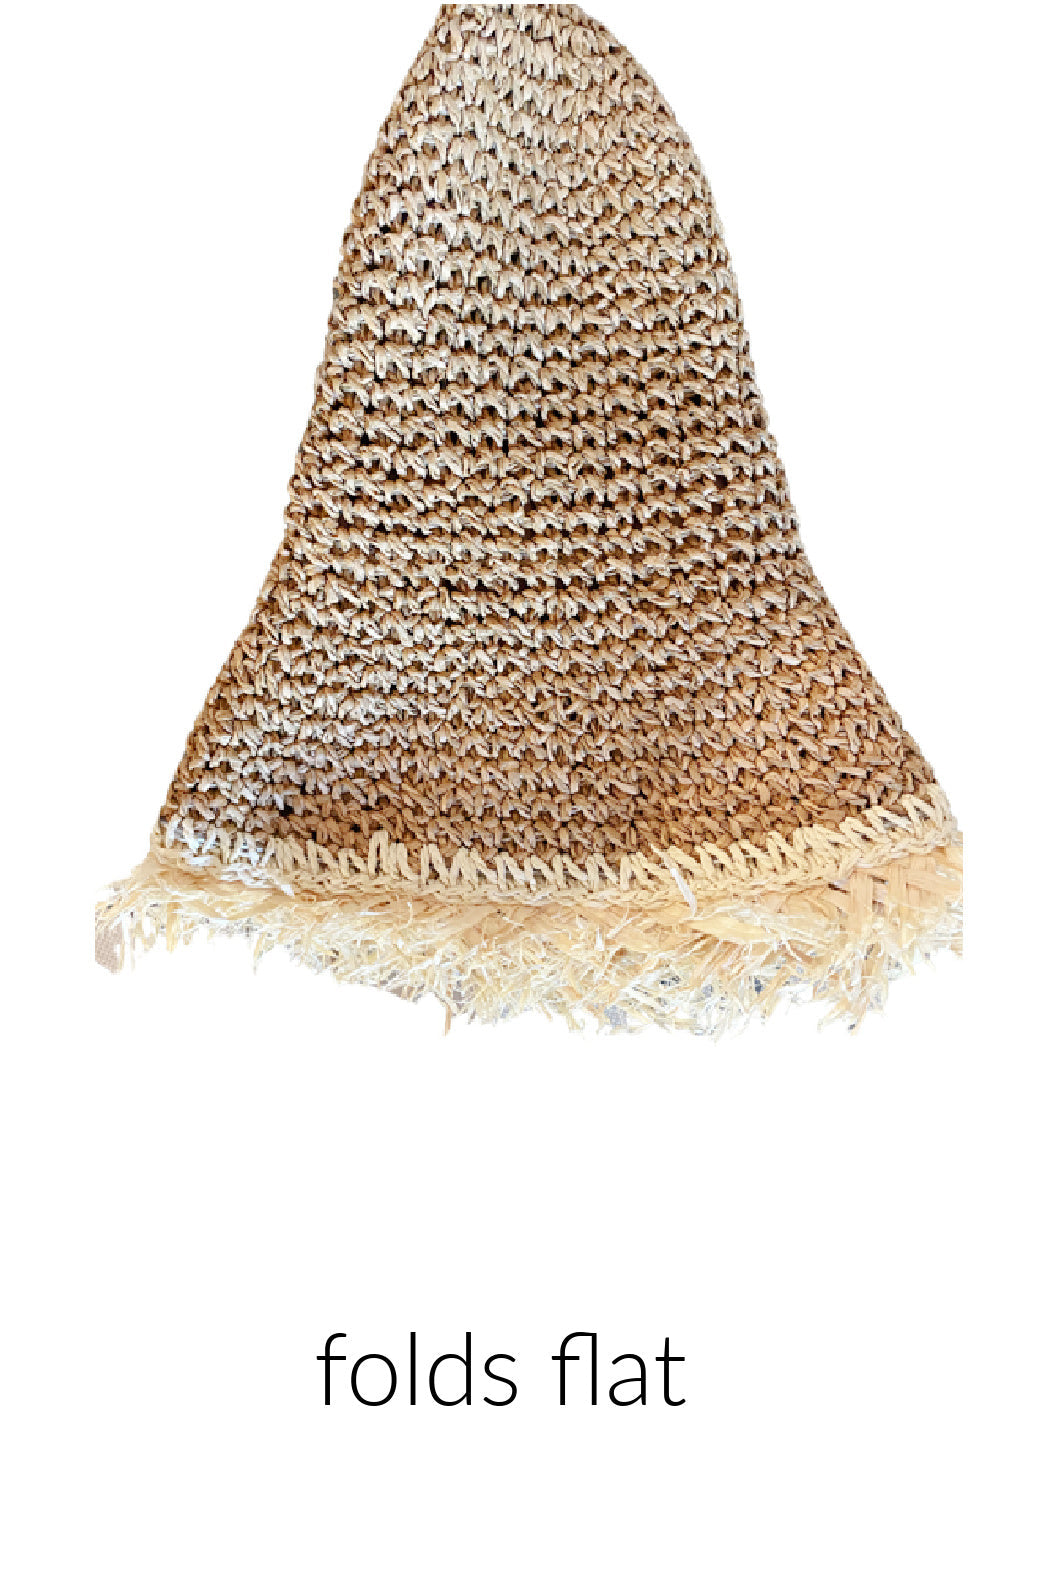 Frayed Edge Straw Bucket Hat by Embellish Your Life